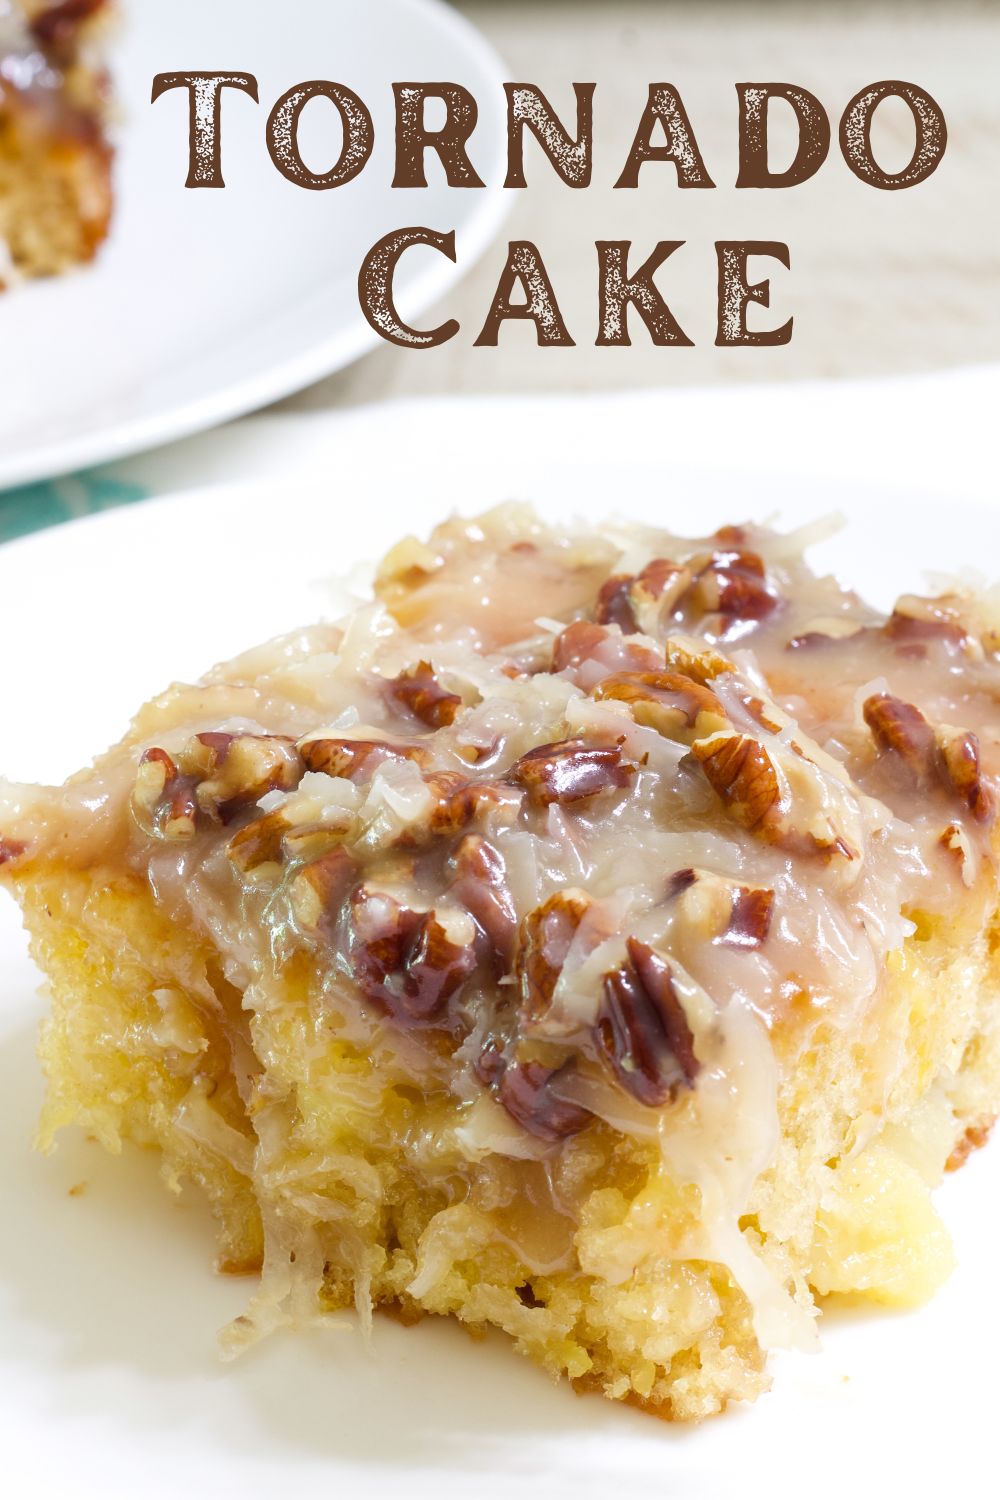 Our Tornado Cake recipe (Do Nothing) is a moist cake made with crushed pineapple and topped with a coconut pecan topping. Easy and delicious! #tornadocake #donothingcake #easydessert via @mindyscookingobsession